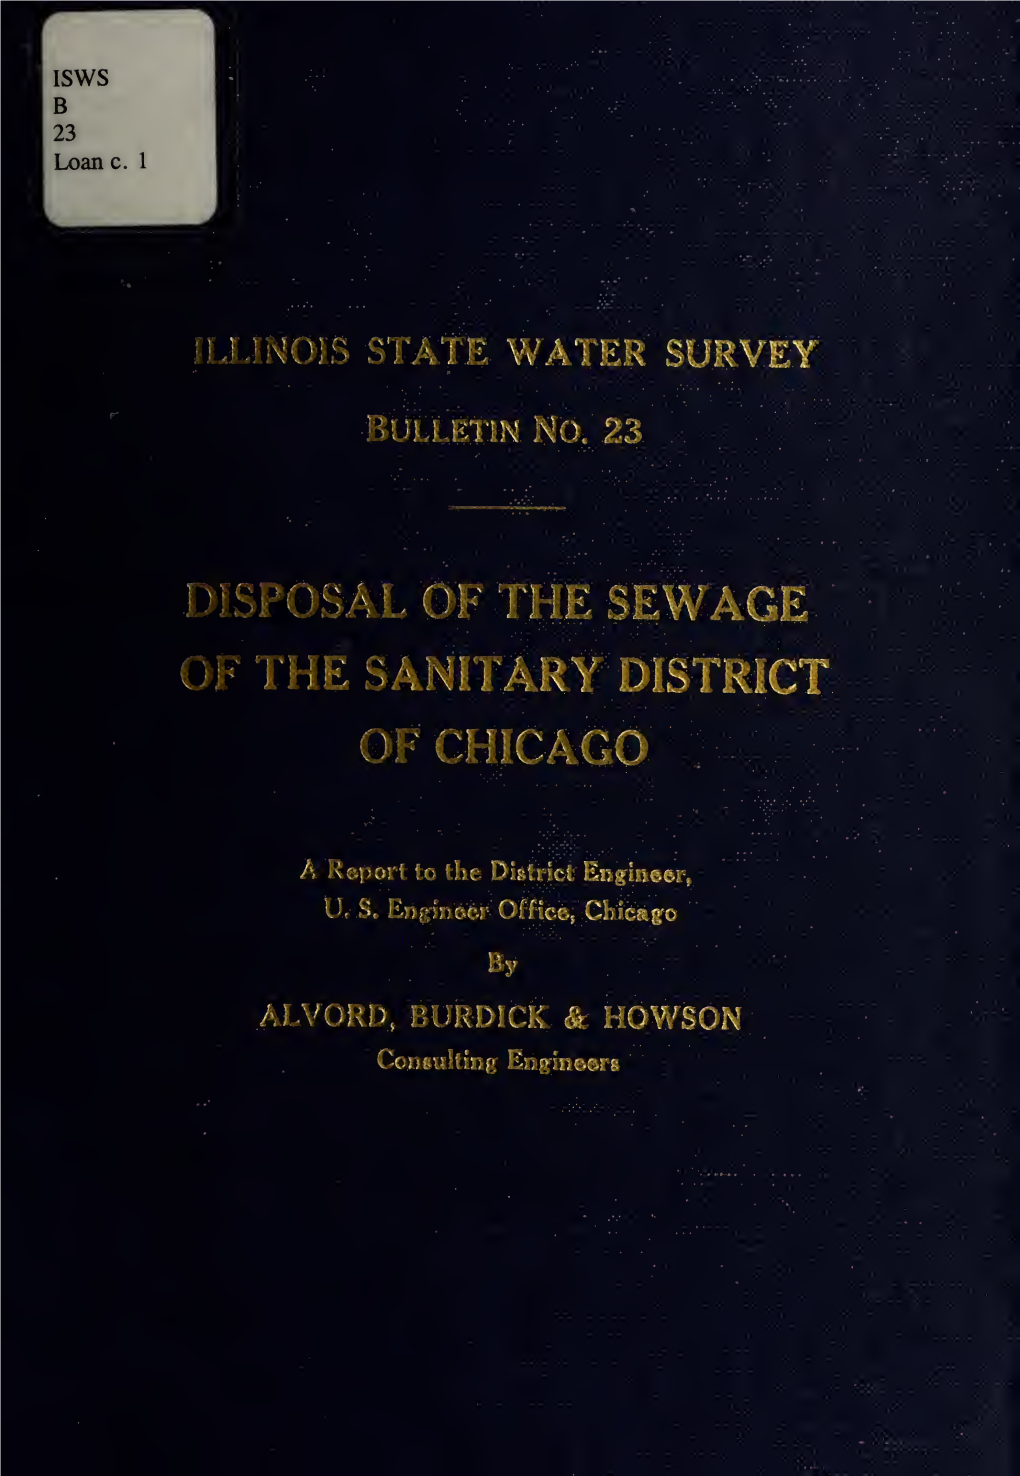 The Disposal of the Sewage of the Sanitary District of Chicago